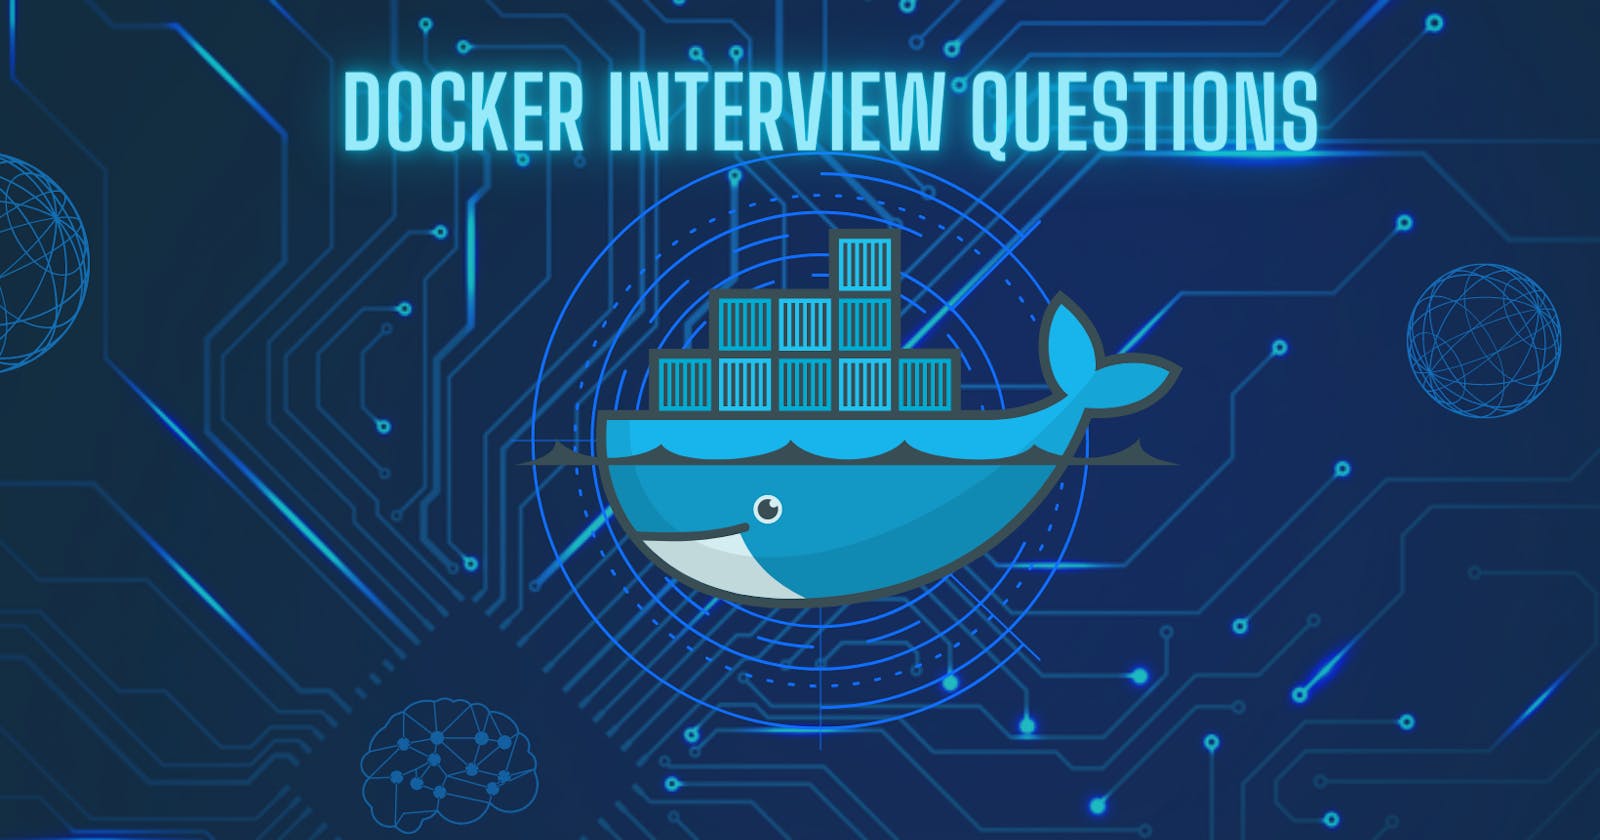 "Docker Interview Questions: Your Ultimate Guide to the Interview"